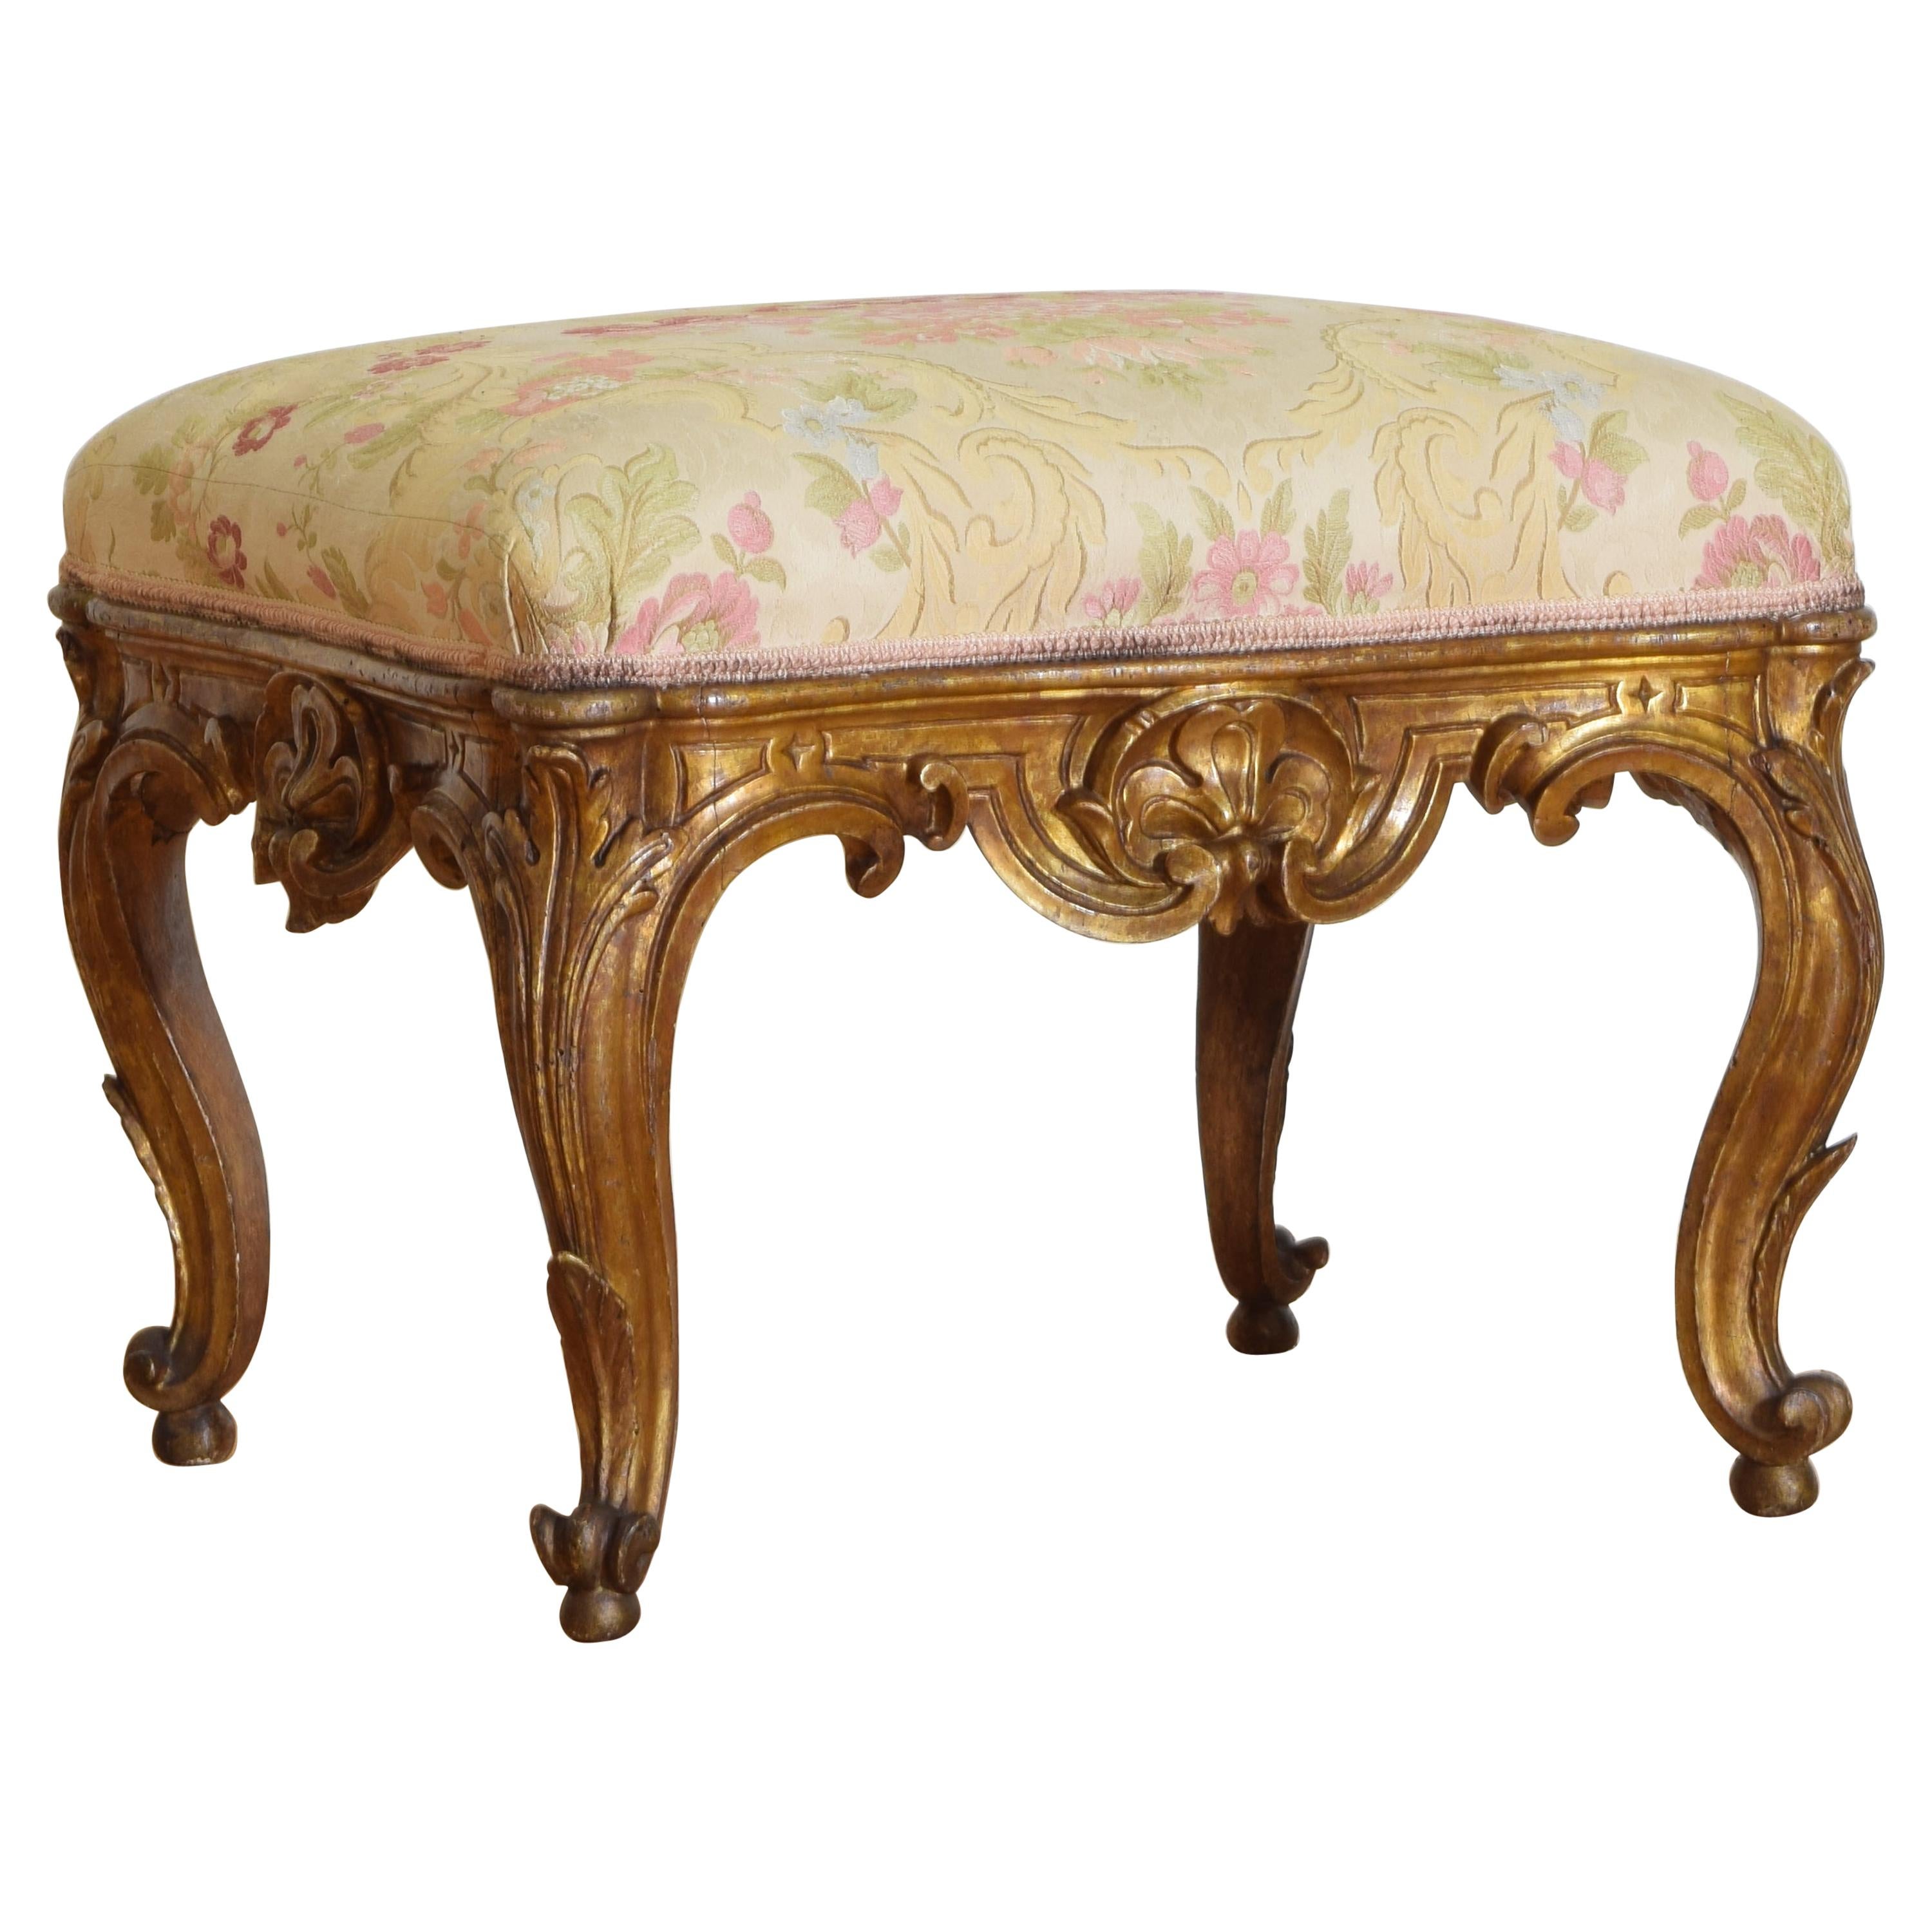 Italian Rococo Revival Carved Giltwood Bench, 3rd Quarter 19th Century For Sale